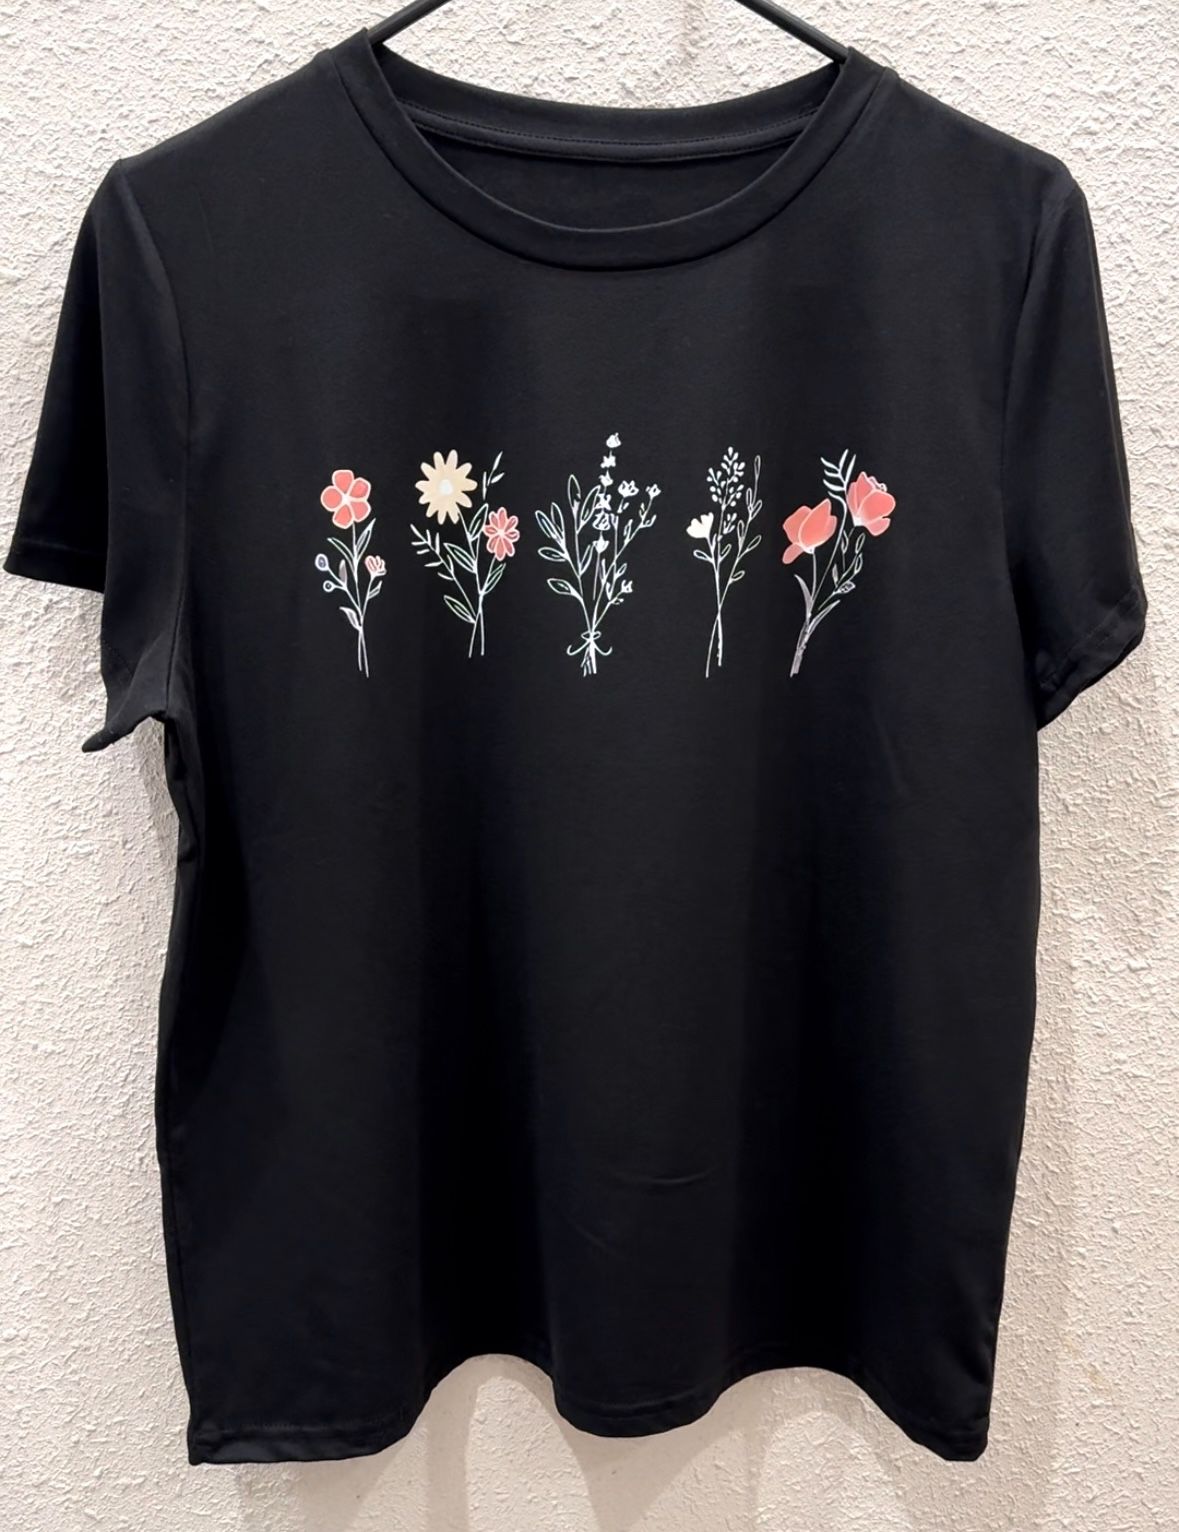 New. Women’s Size Large Floral Graphic Tee